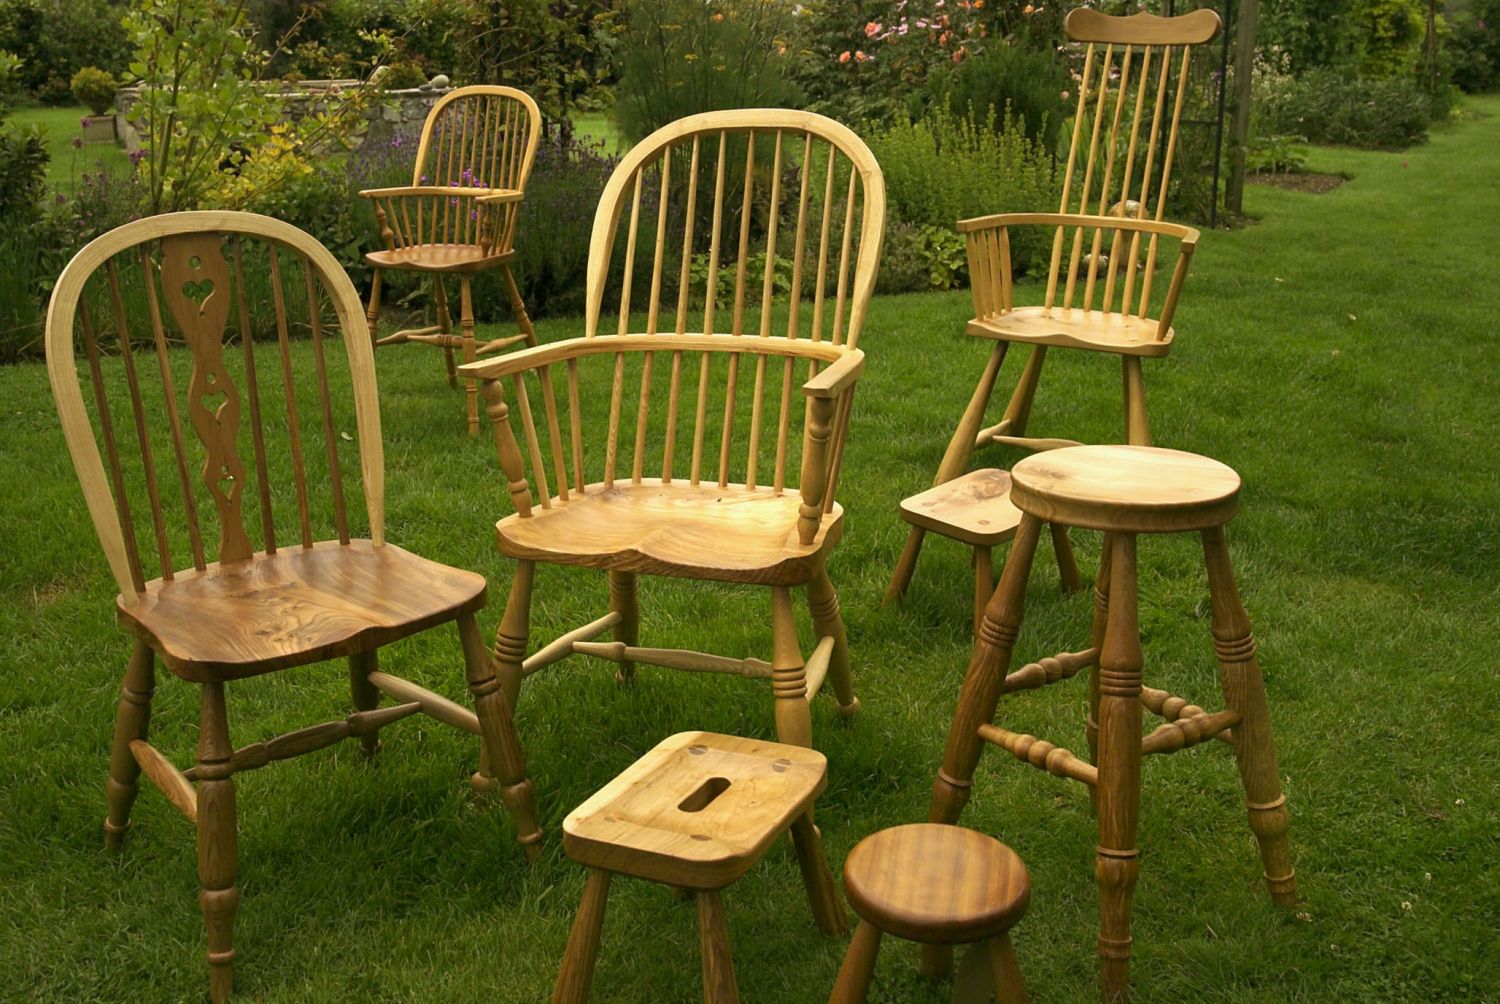 Stools and Chairs